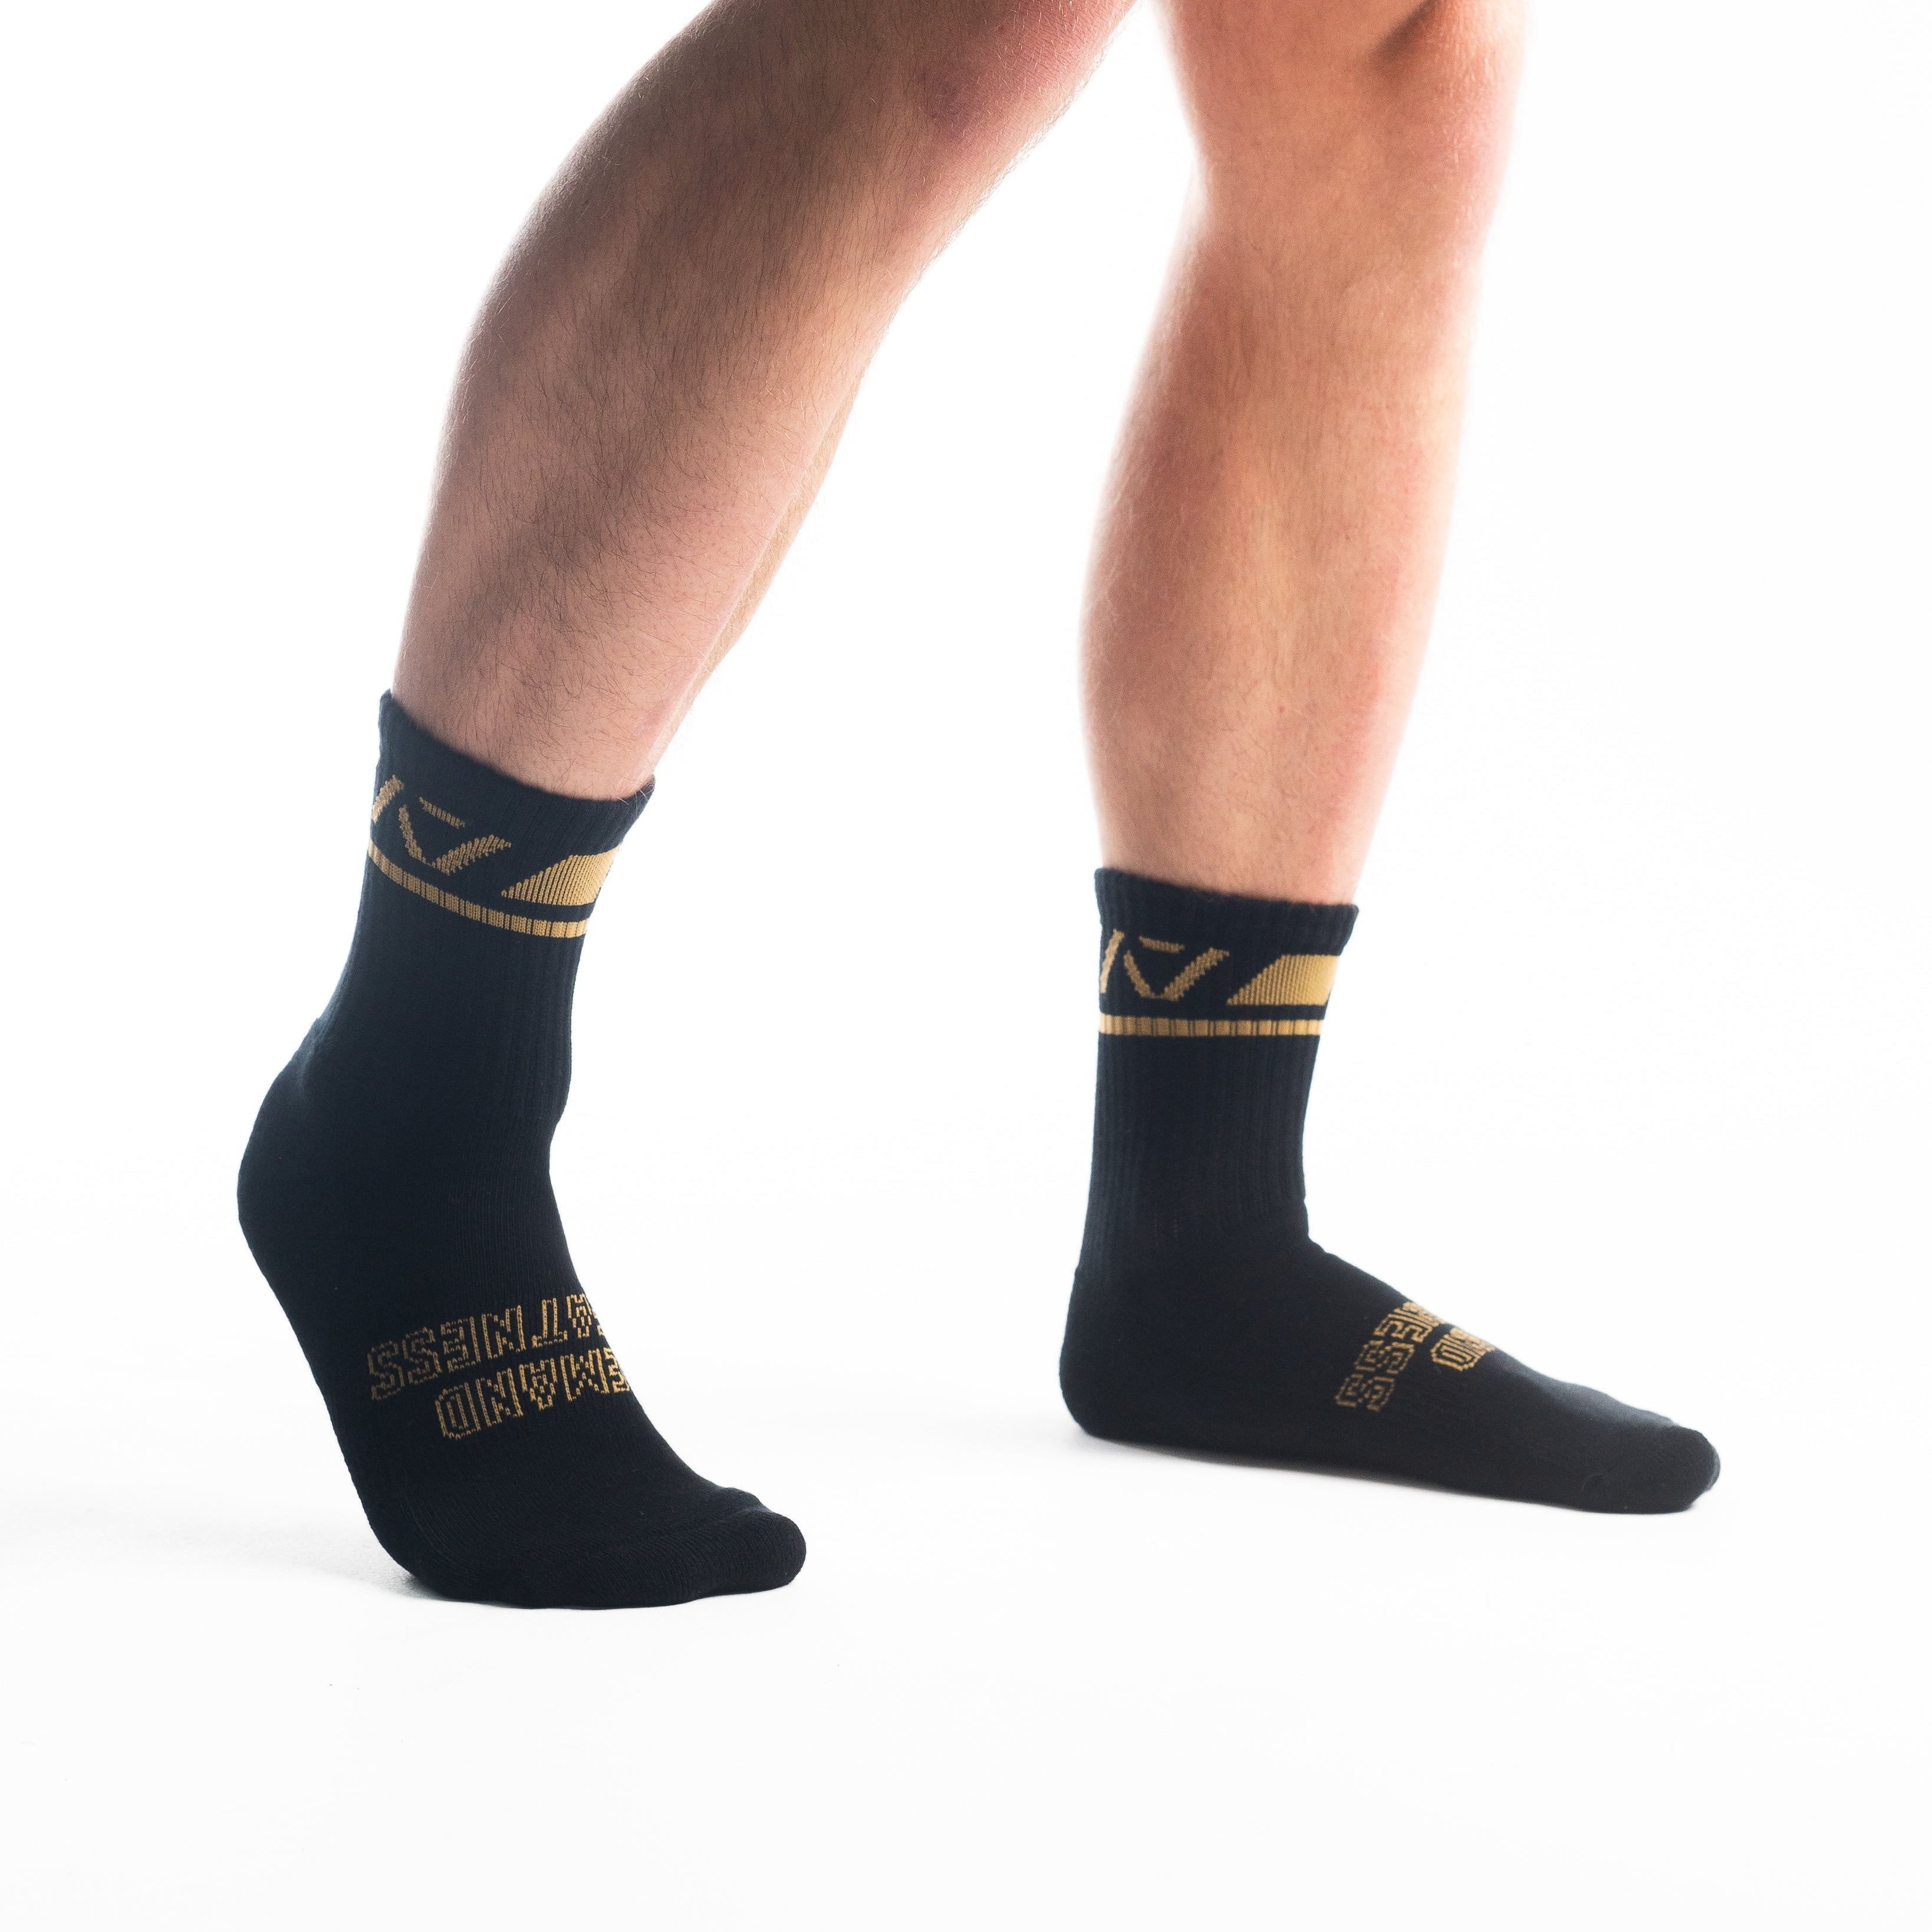 A7 Gold Standard Crew socks showcase gold logos and let your energy show on the platform, in your training or while out and about. The IPF Approved Gold Standard Meet Kit includes Powerlifting Singlet, A7 Meet Shirt, A7 Zebra Wrist Wraps, A7 Deadlift Socks, Hourglass Knee Sleeves (Stiff Knee Sleeves and Rigor Mortis Knee Sleeves). Genouillères powerlifting shipping to France, Spain, Ireland, Germany, Italy, Sweden and EU.